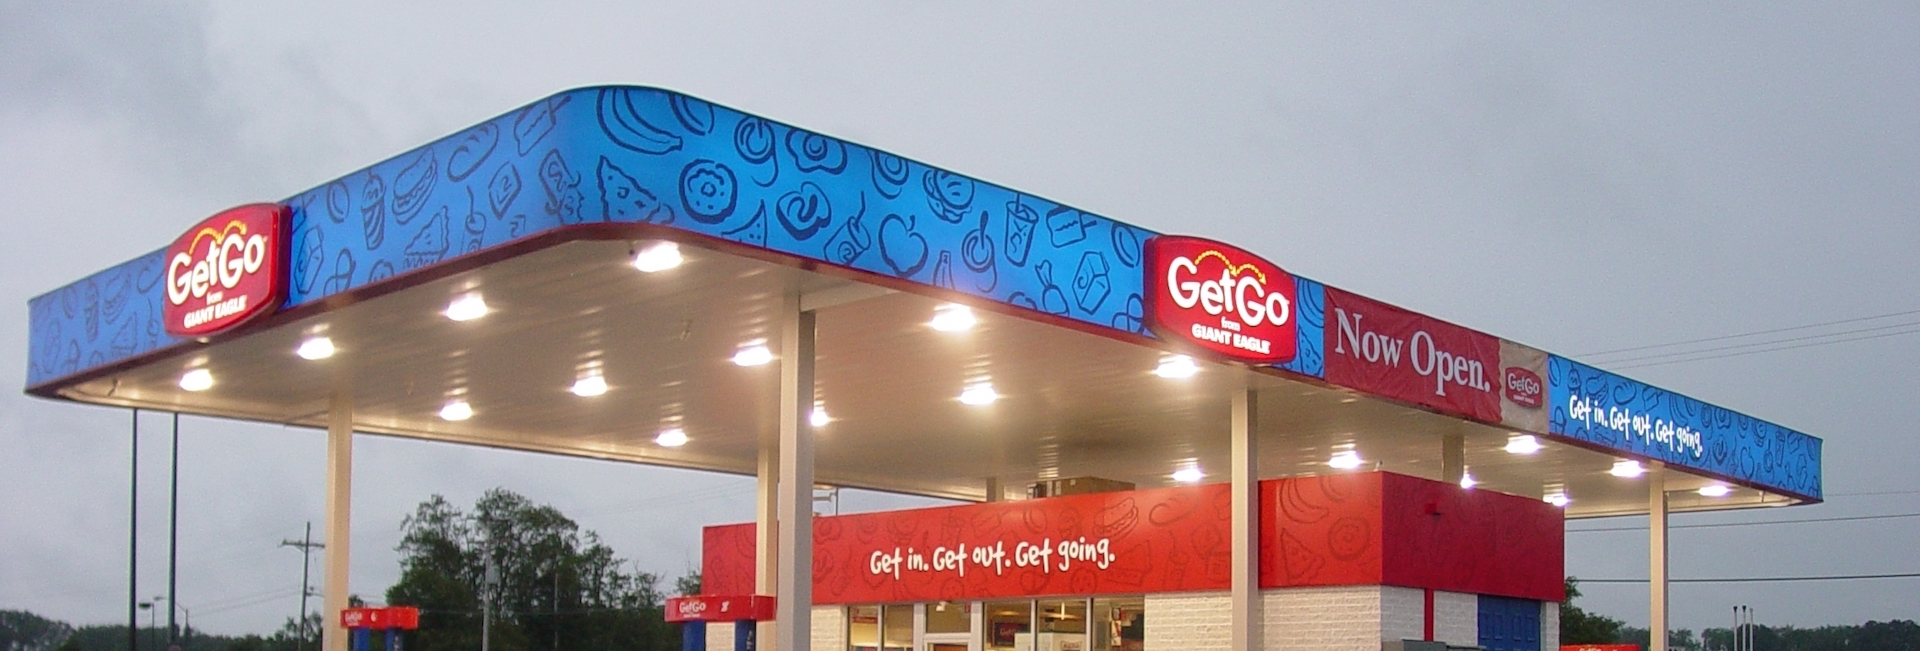 Our Work with Giant Eagle / GetGo